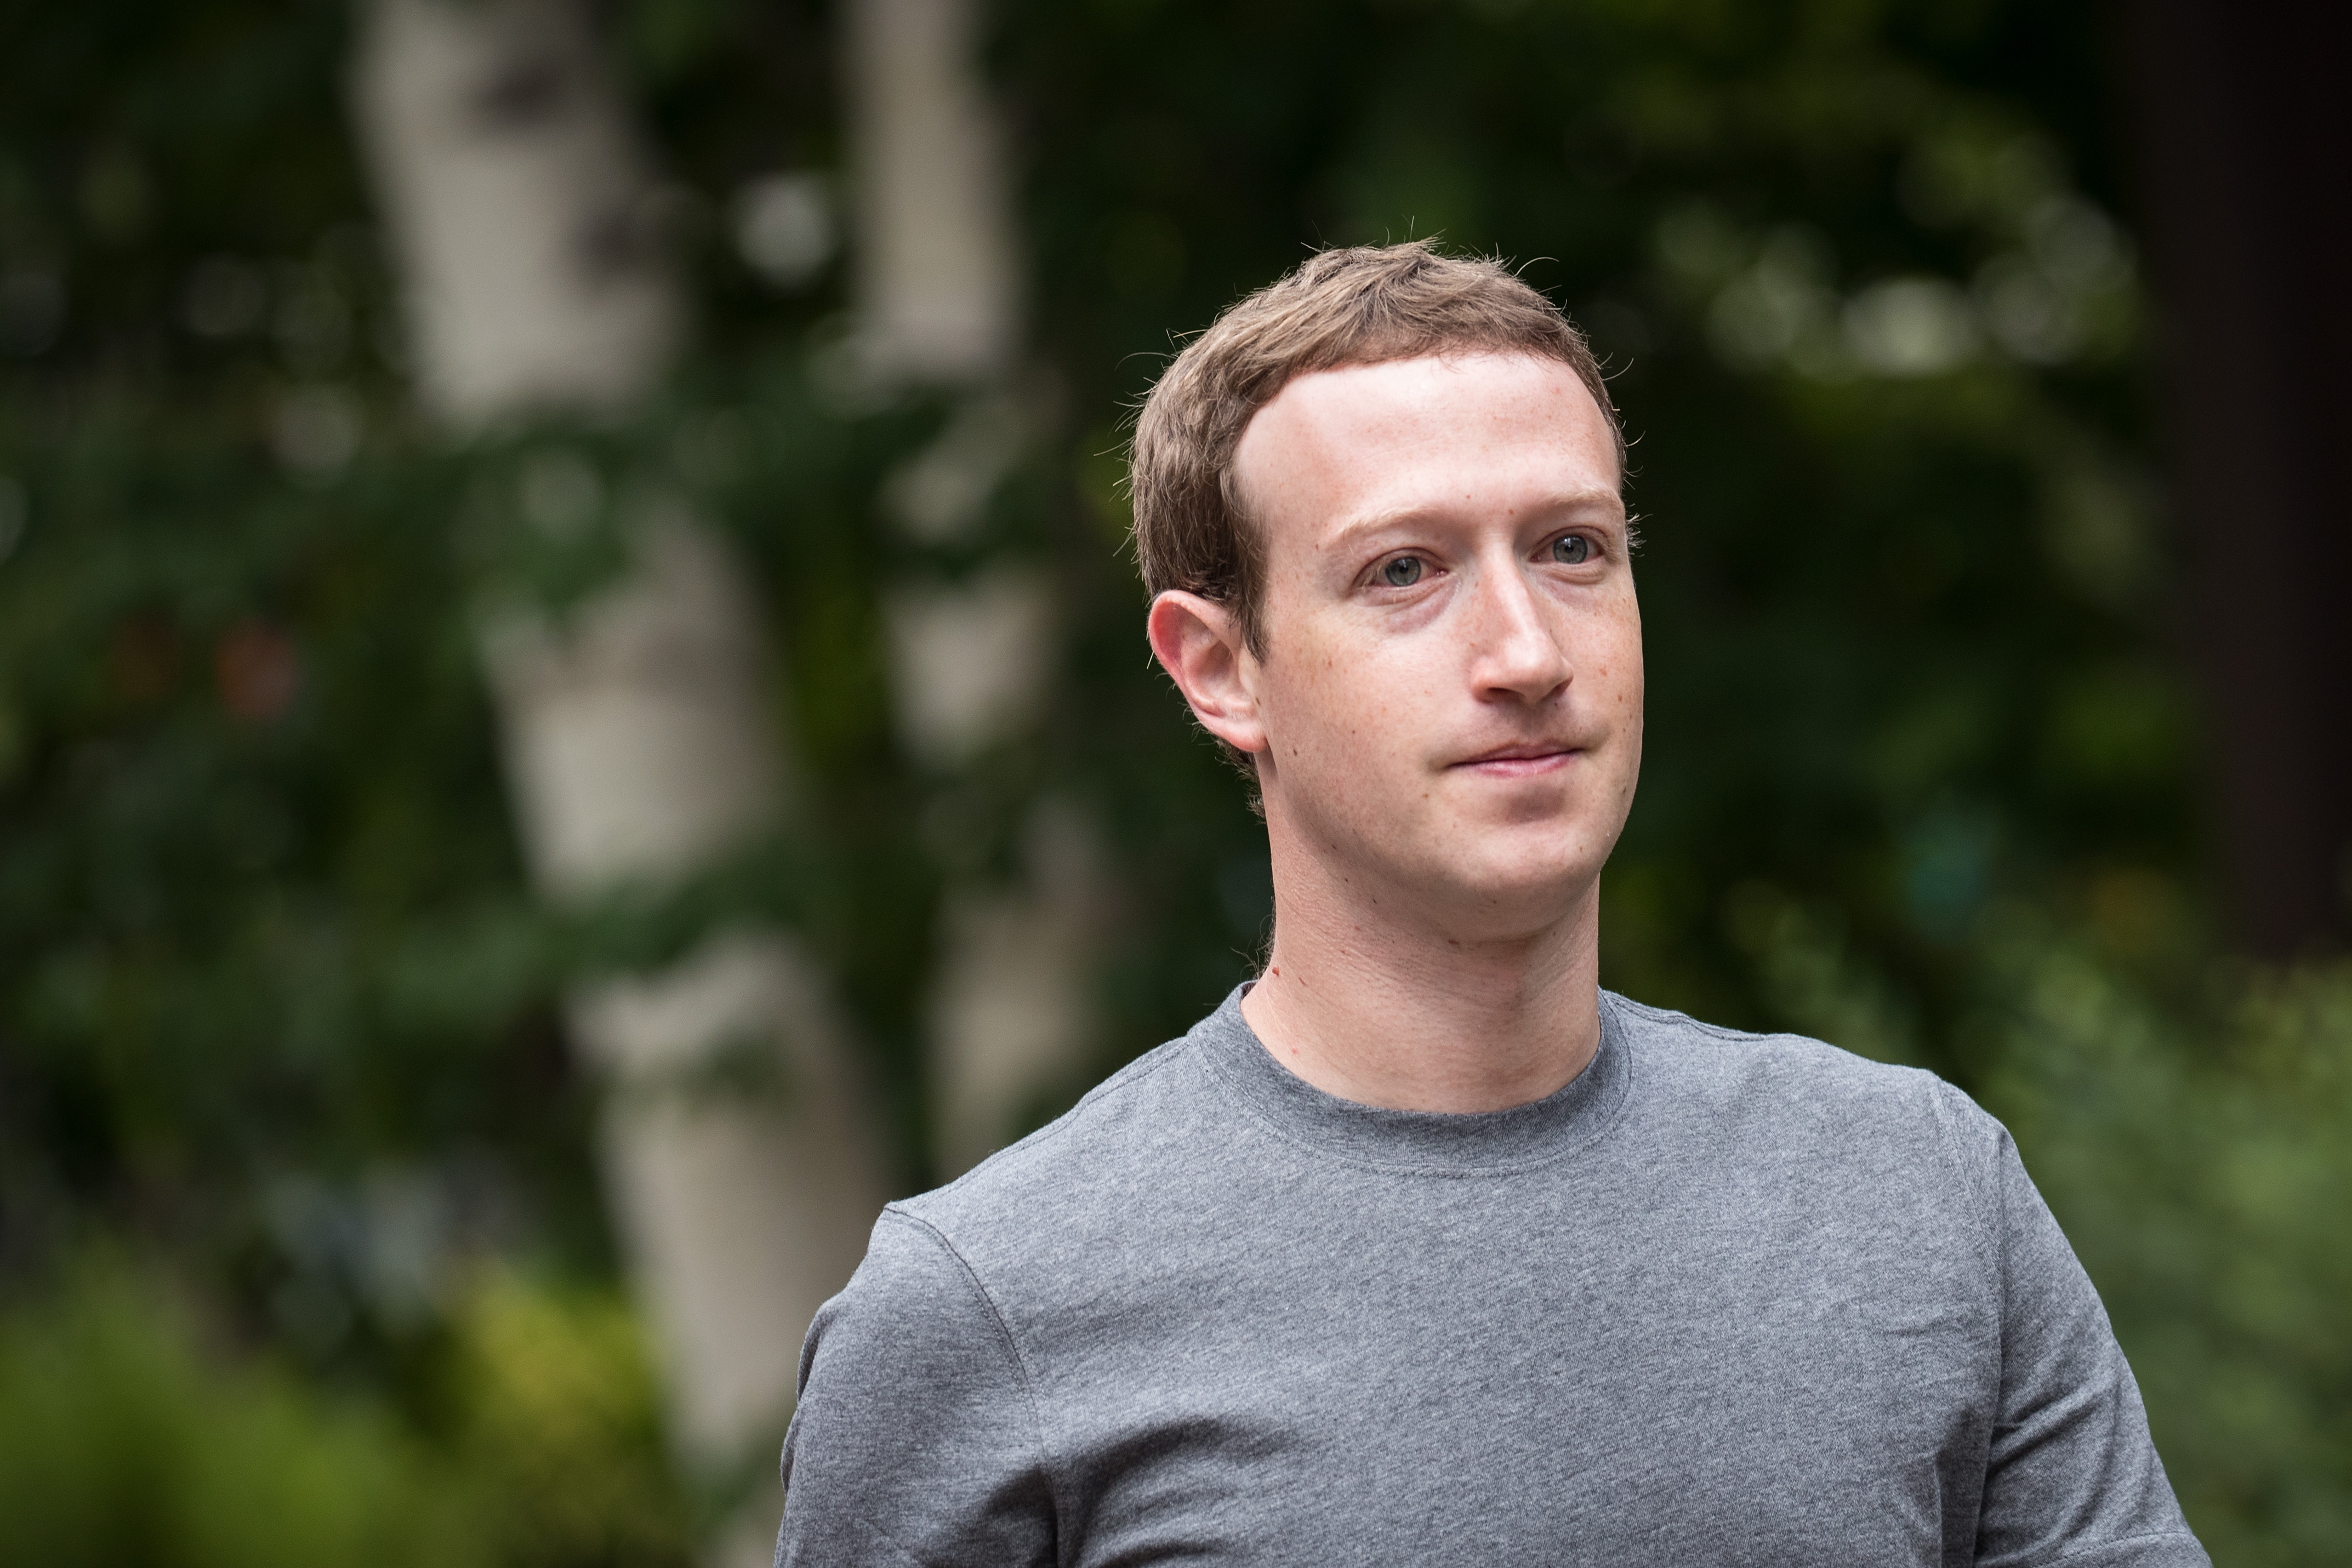 Mark Zuckerberg, chief executive officer and founder of Facebook on July 14, 2017 in Sun Valley, Idaho. (Drew Angerer—Getty Images)